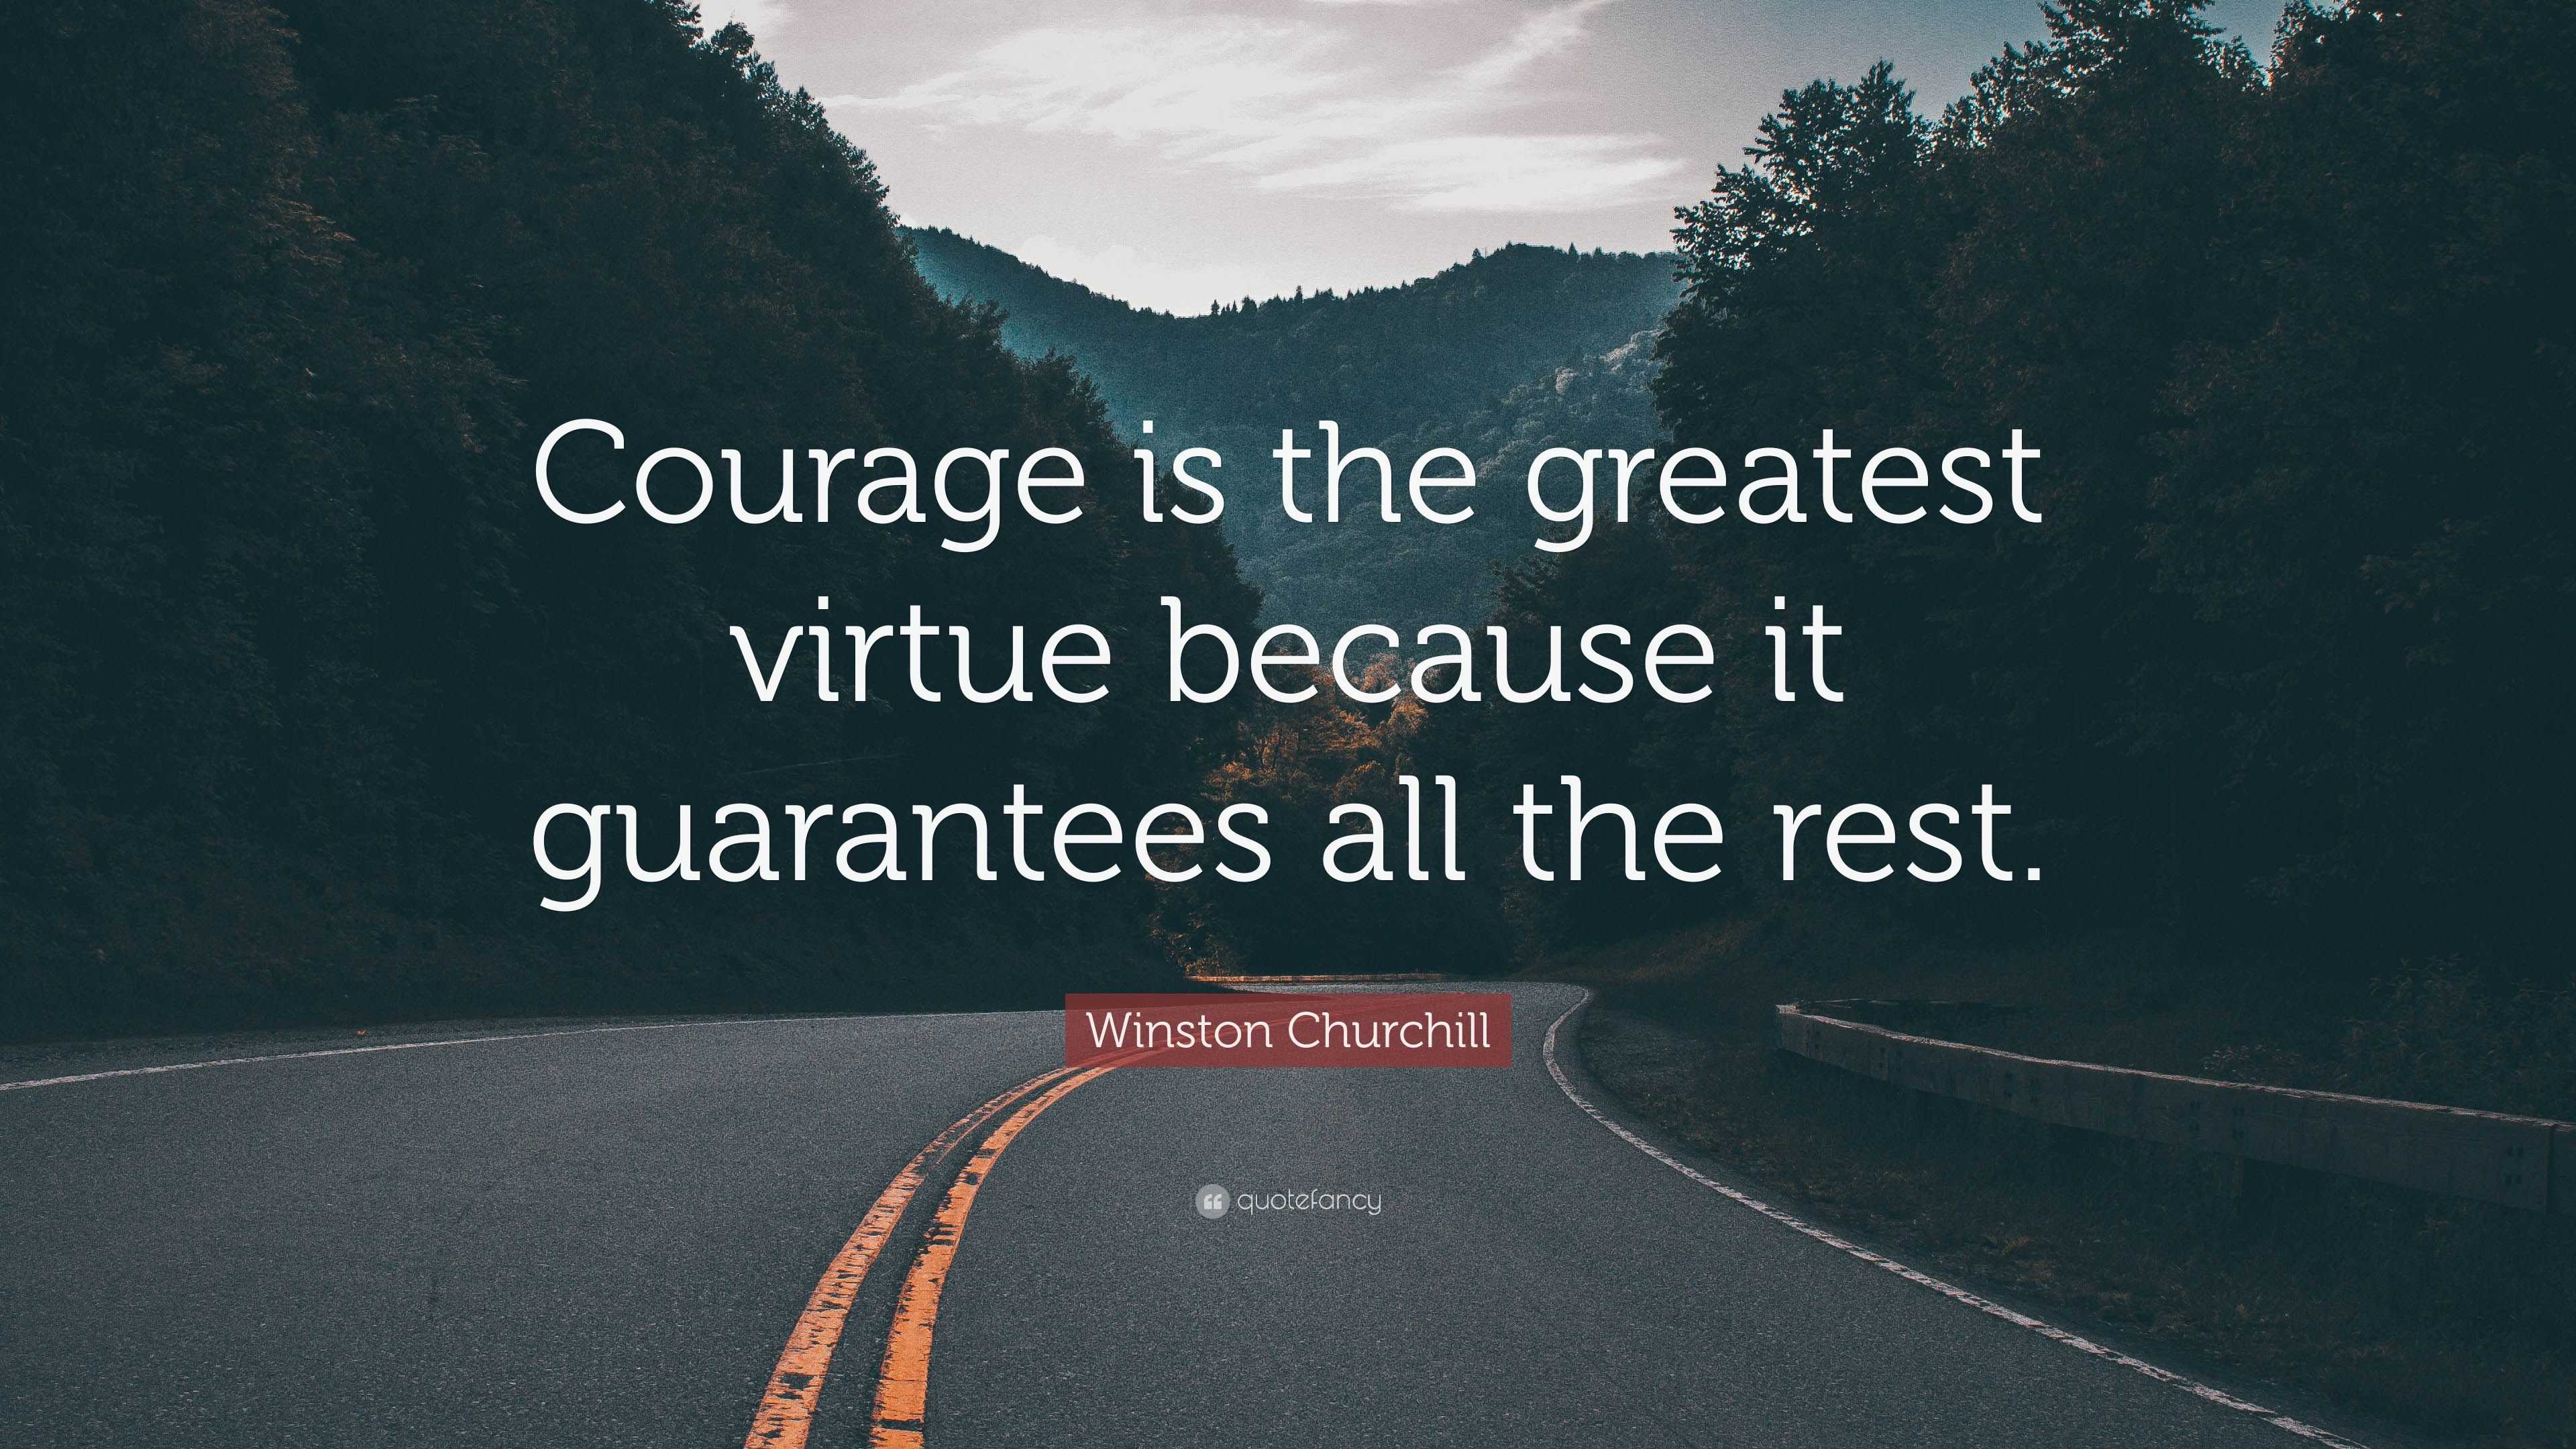 Winston Churchill Quote: “Courage is the greatest virtue because it ...